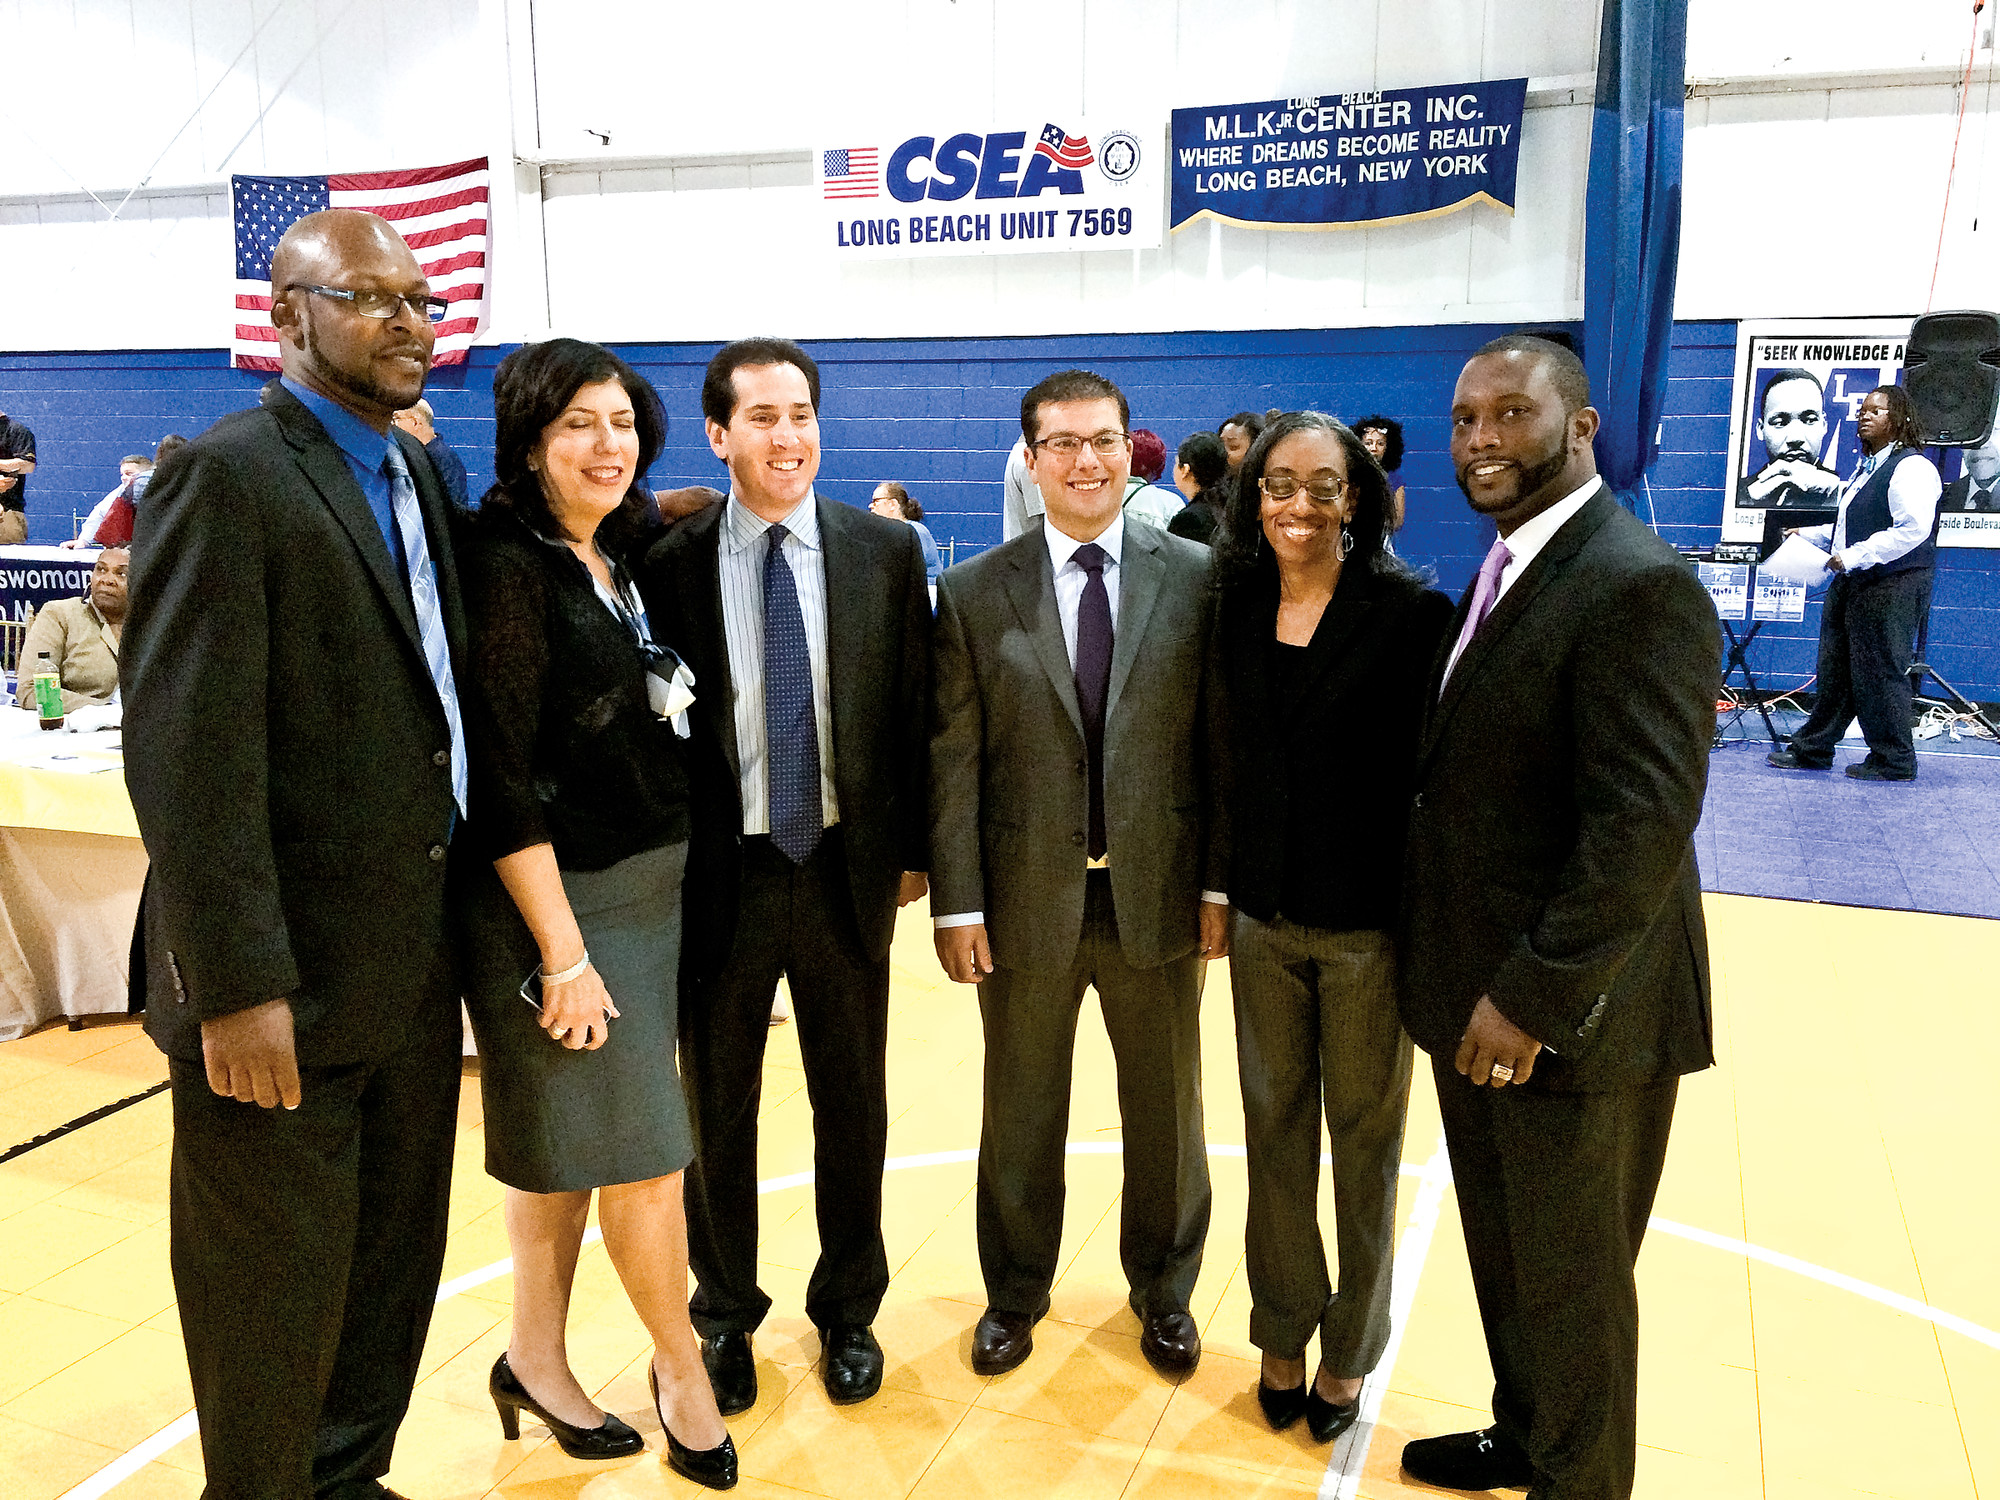 Matthew Ern/Herald
Event organizer Marcus Tinker, far left, acting Nassau County District Attorney Madeline Singas, State Assemblyman Todd Kaminsky, City Manager Jack Schnirman, City Council candidate Anissa Moore and Martin Luther King Center Chairman James Hodge at last week’s job fair.